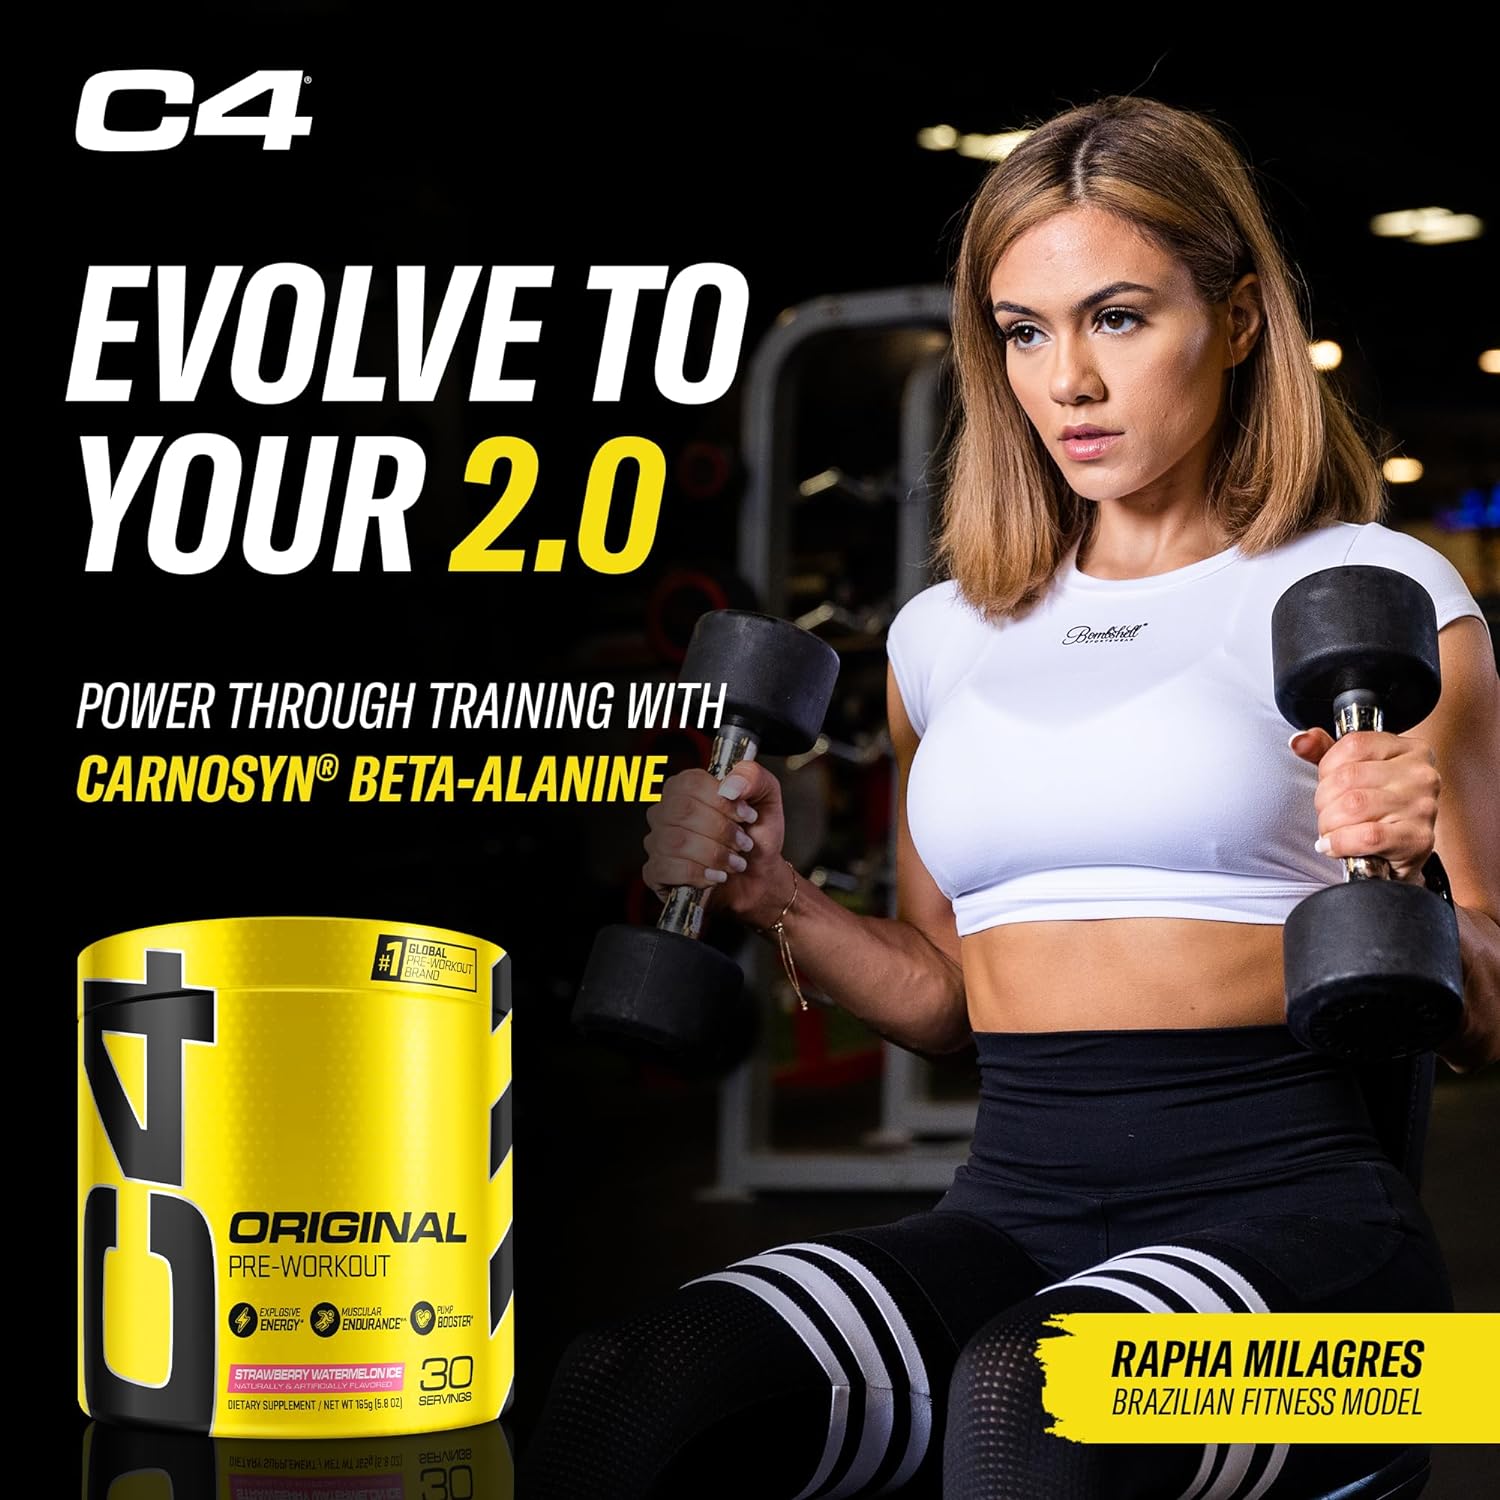 Cellucor C4 Original Pre Workout Powder Strawberry Watermelon Ice Sugar Free Preworkout Energy for Men & Women 150mg Caffeine + Beta Alanine + Creatine - 30 Servings (Packaging May Vary) : Health & Household